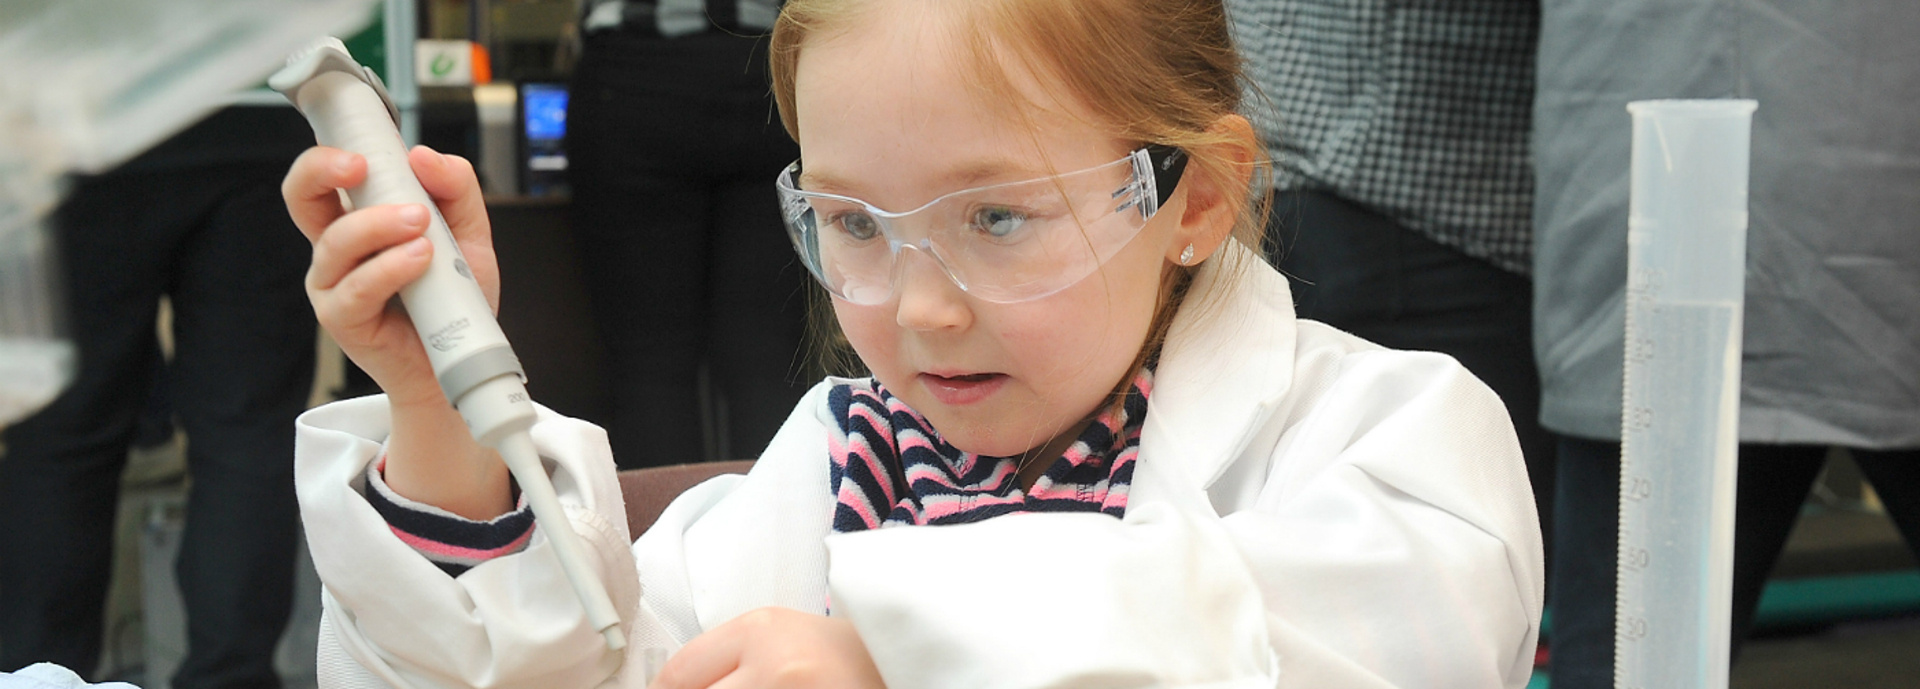 An image of a child at the science fair